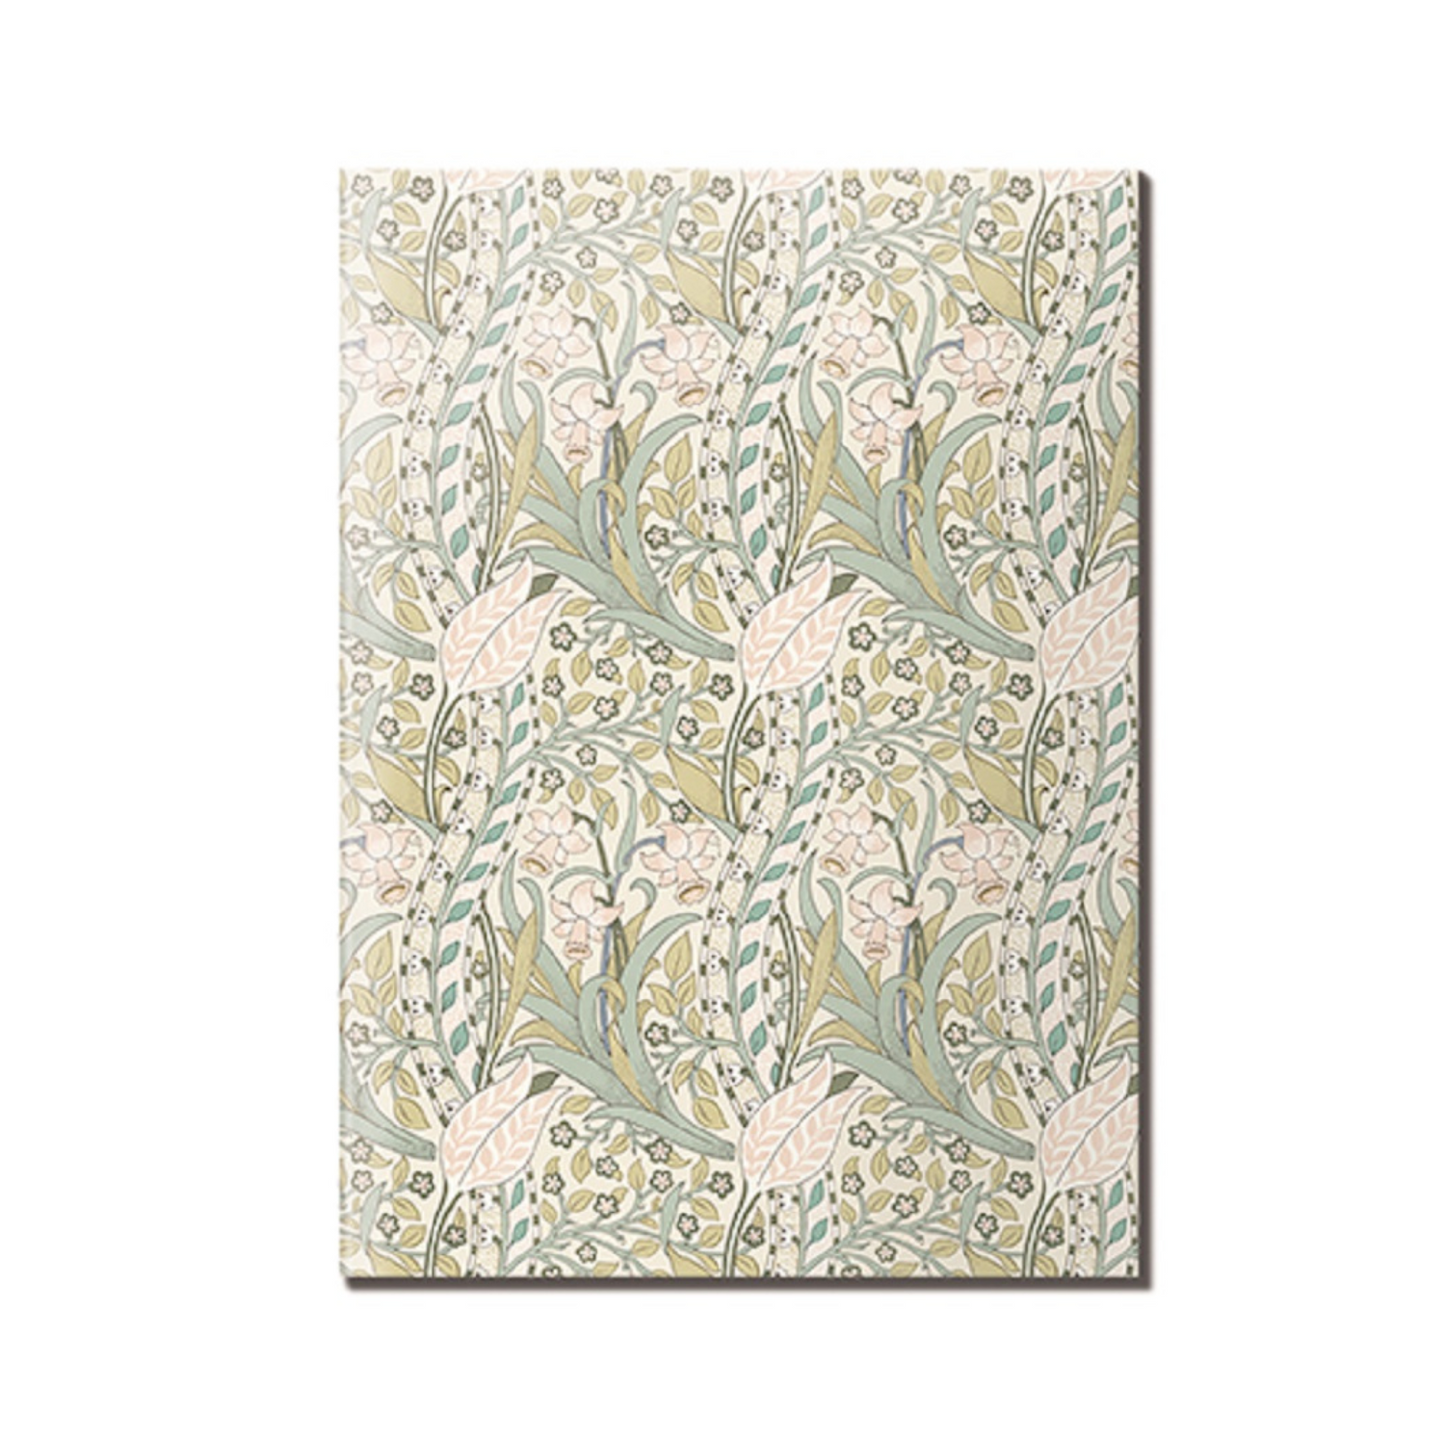 William Morris Set Of 3 A6 Notebooks In Mixed Designs